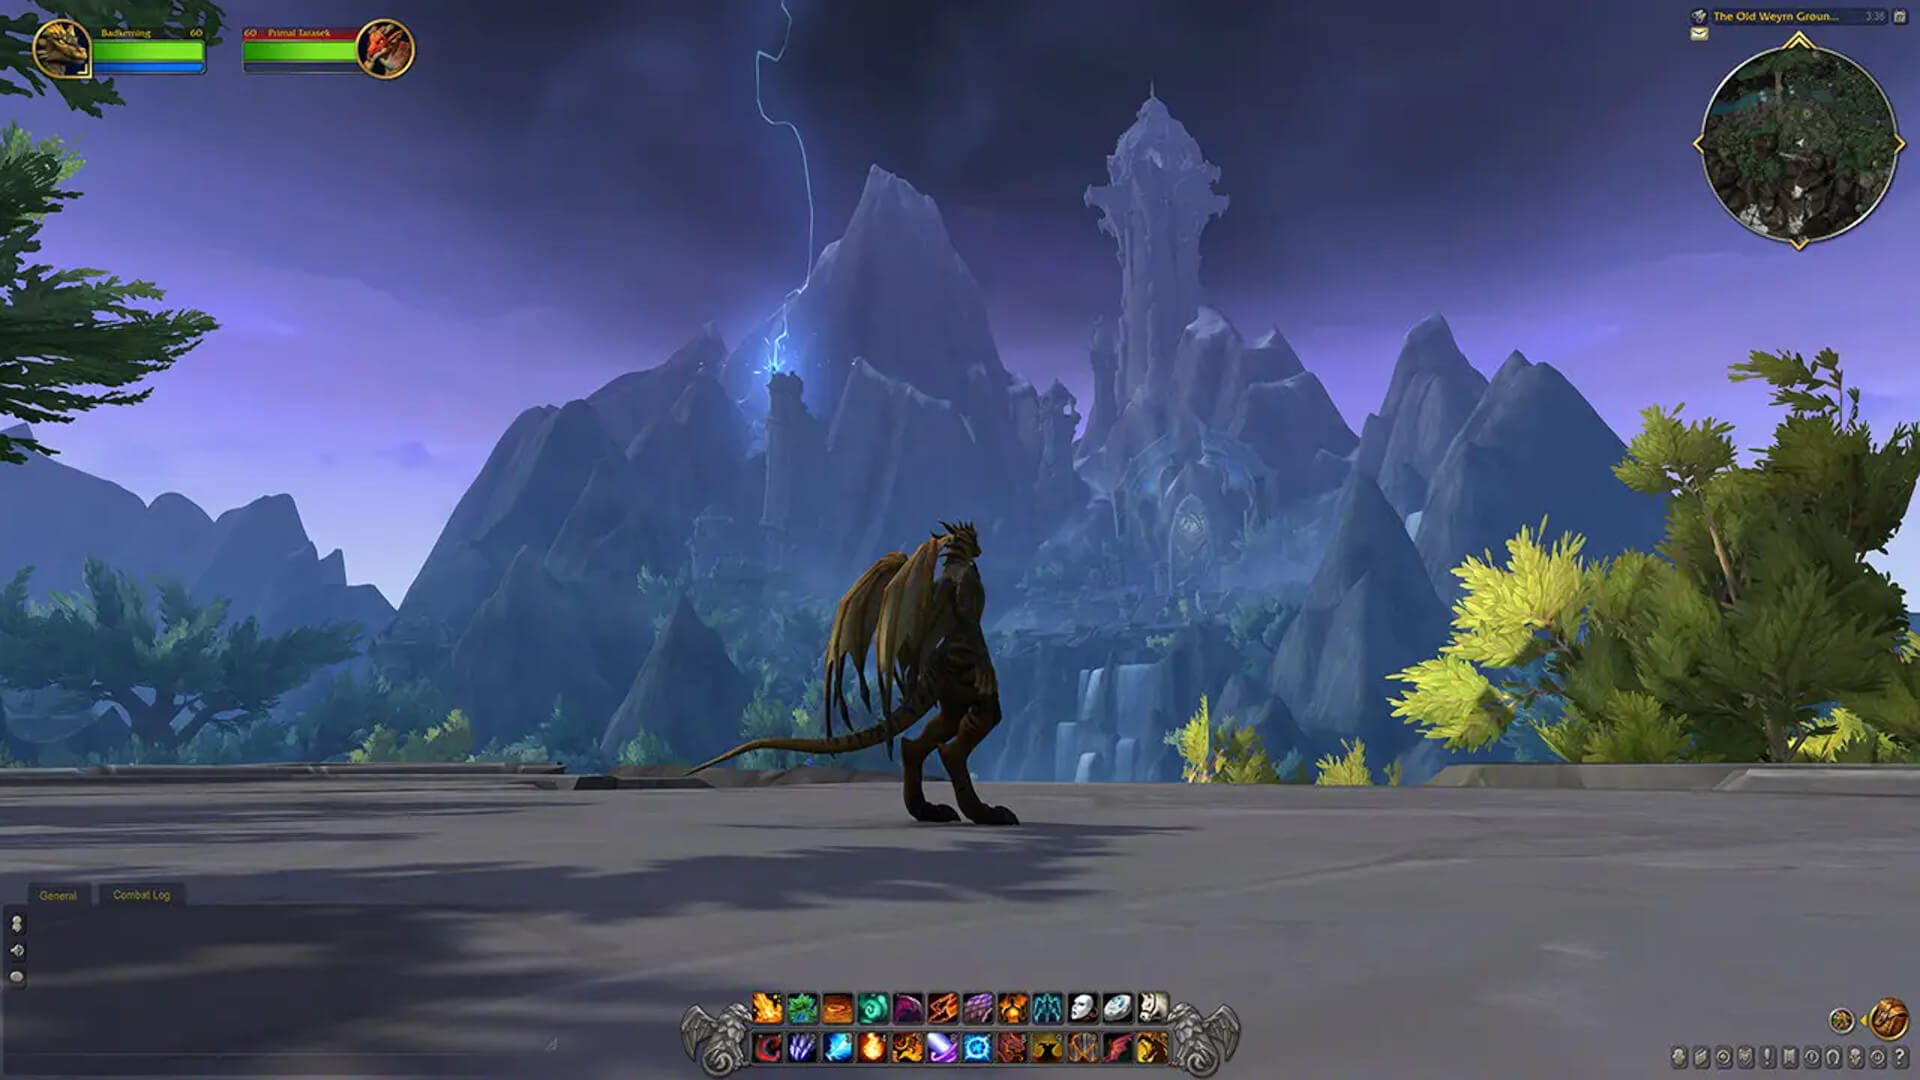 A Dracthyr standing still in the Activision Blizzard game World of Warcraft